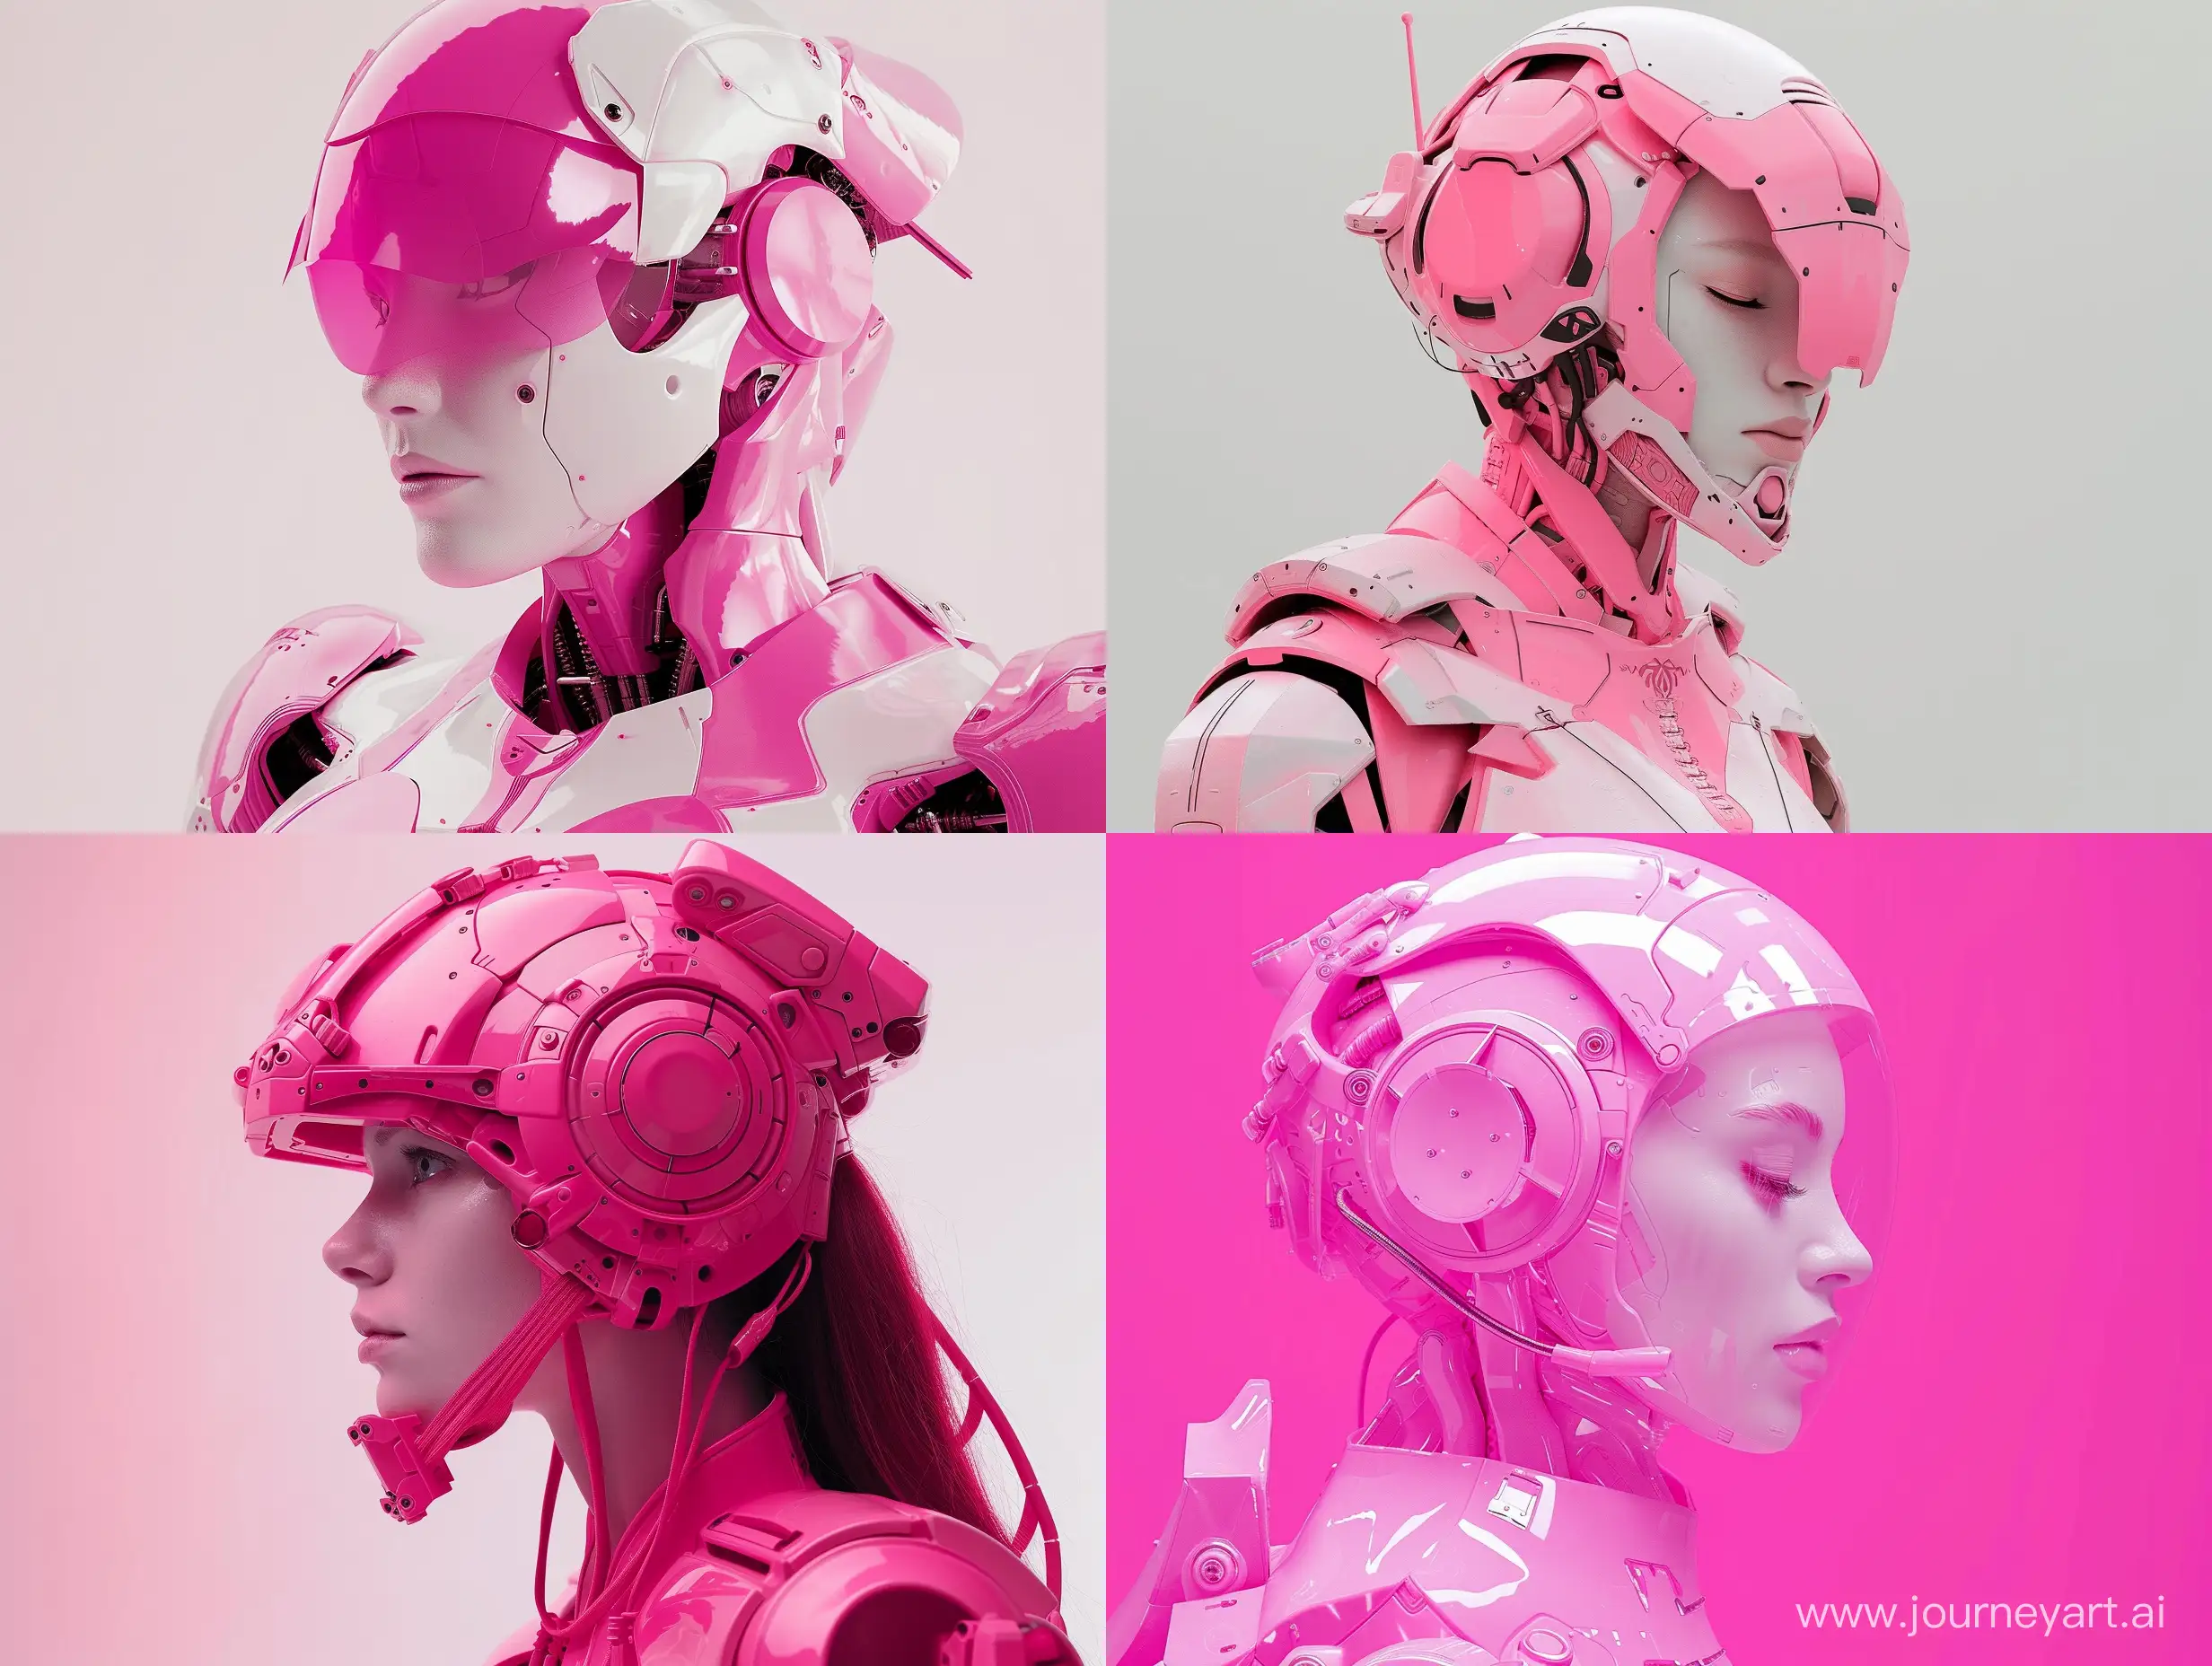 Enchanting-Pink-Robotoid-Woman-A-Mystical-Fusion-of-Technology-and-Elegance